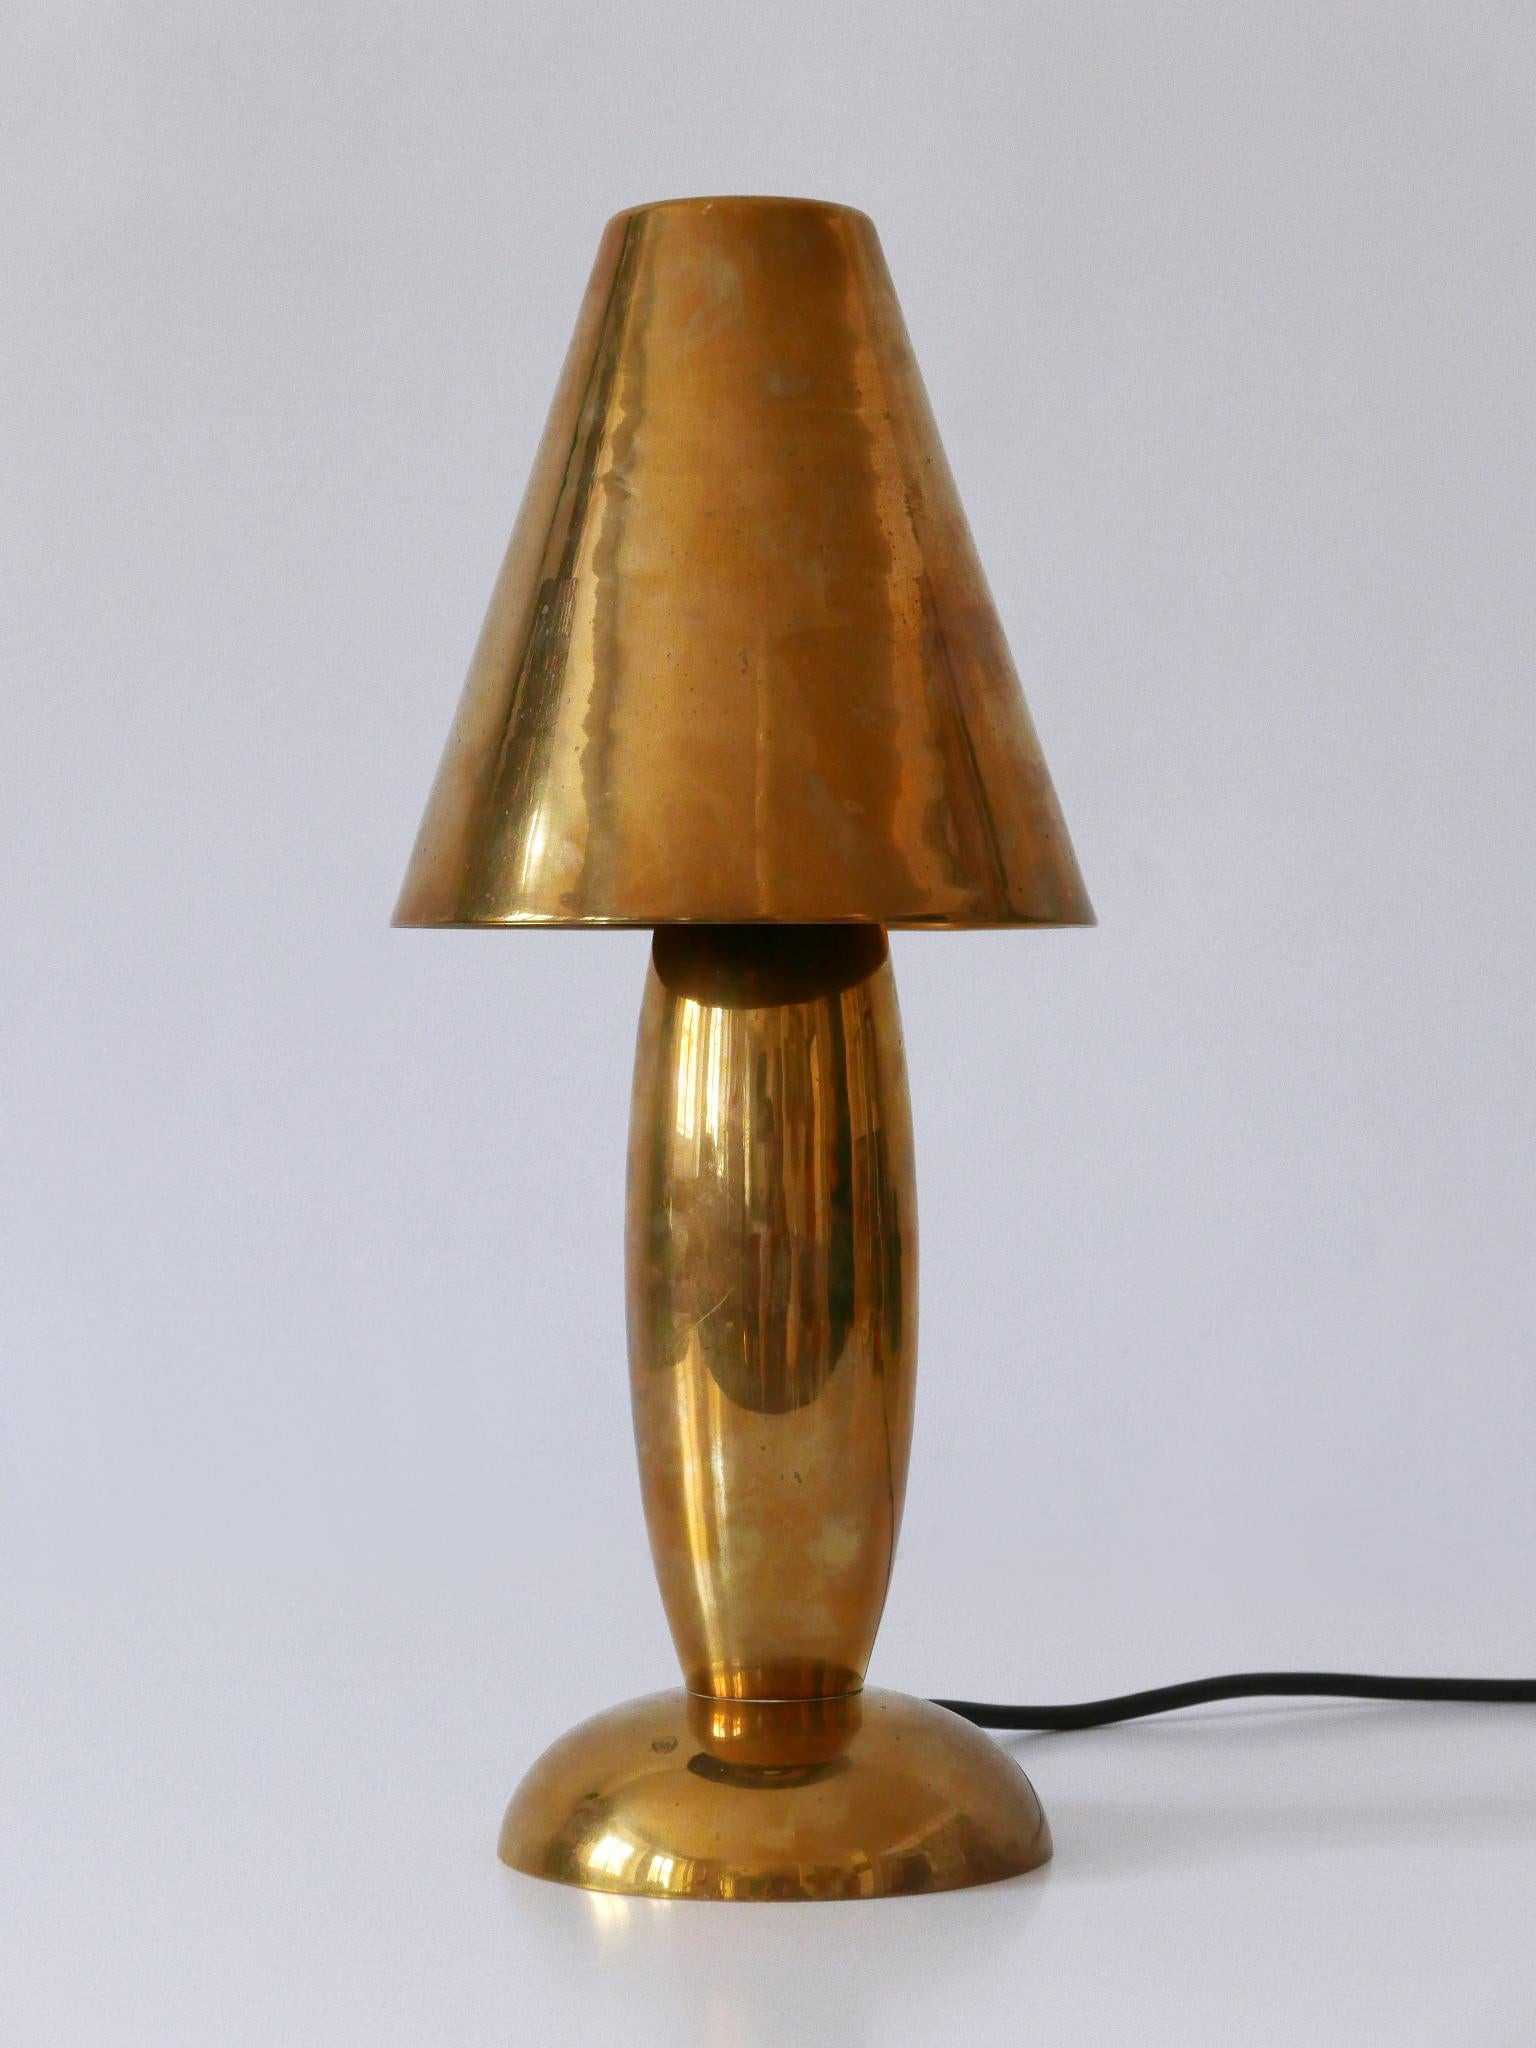 Rare & Lovely Mid-Century Modern Brass Side Table Lamp by Lambert Germany 1970s In Good Condition For Sale In Munich, DE